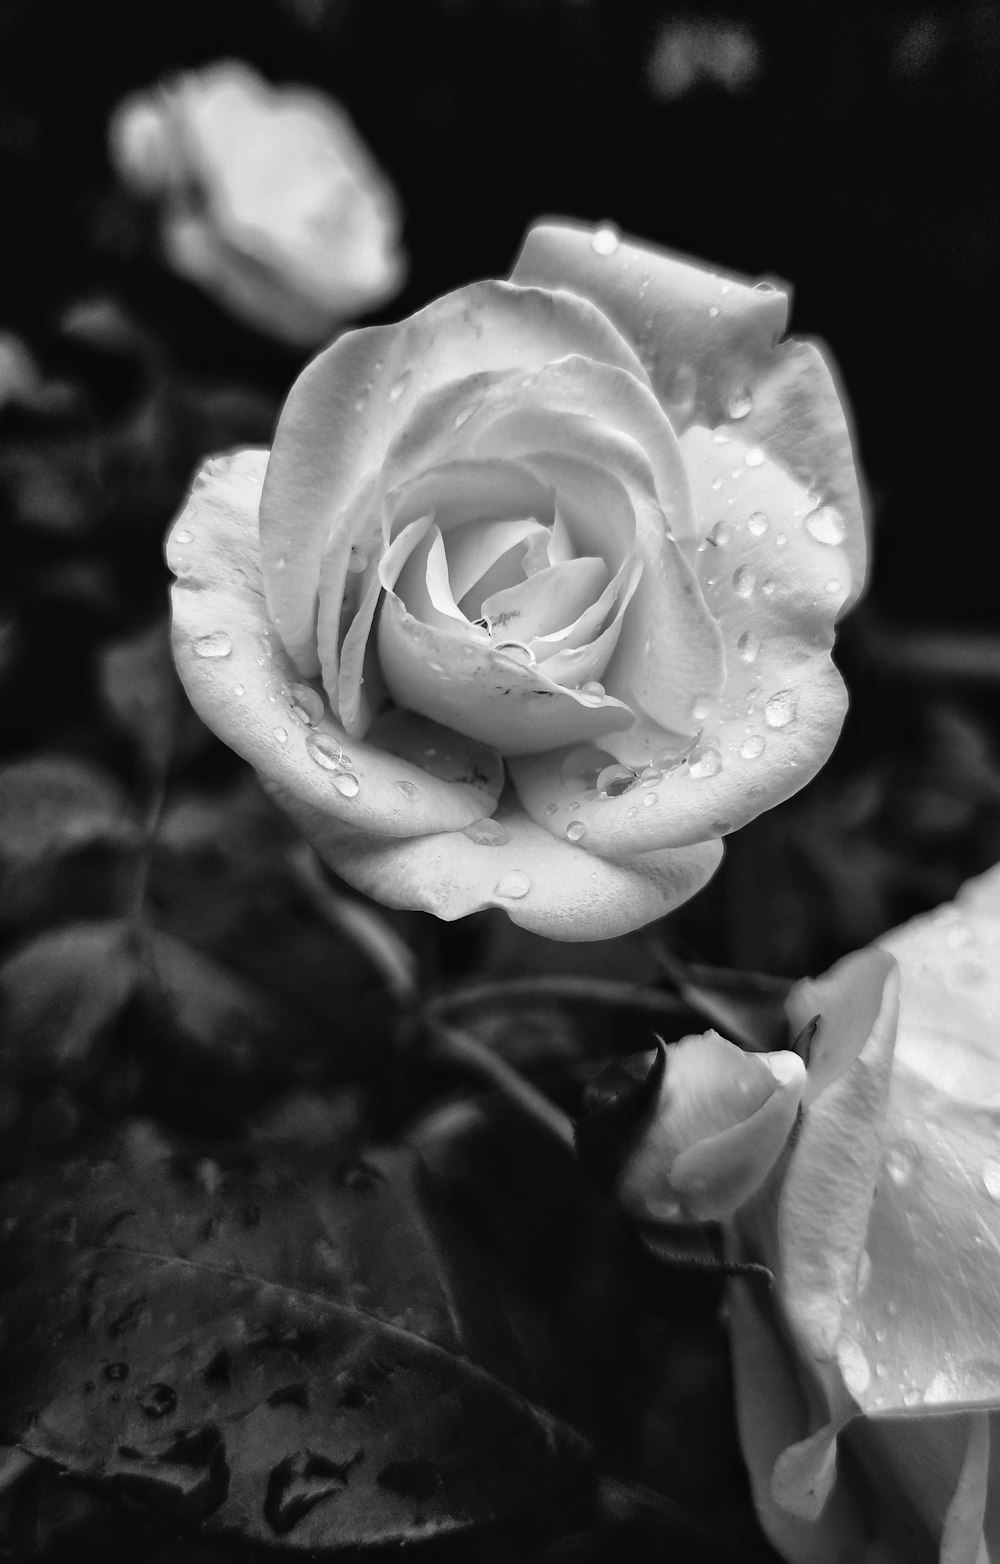 a black and white photo of a rose with water droplets